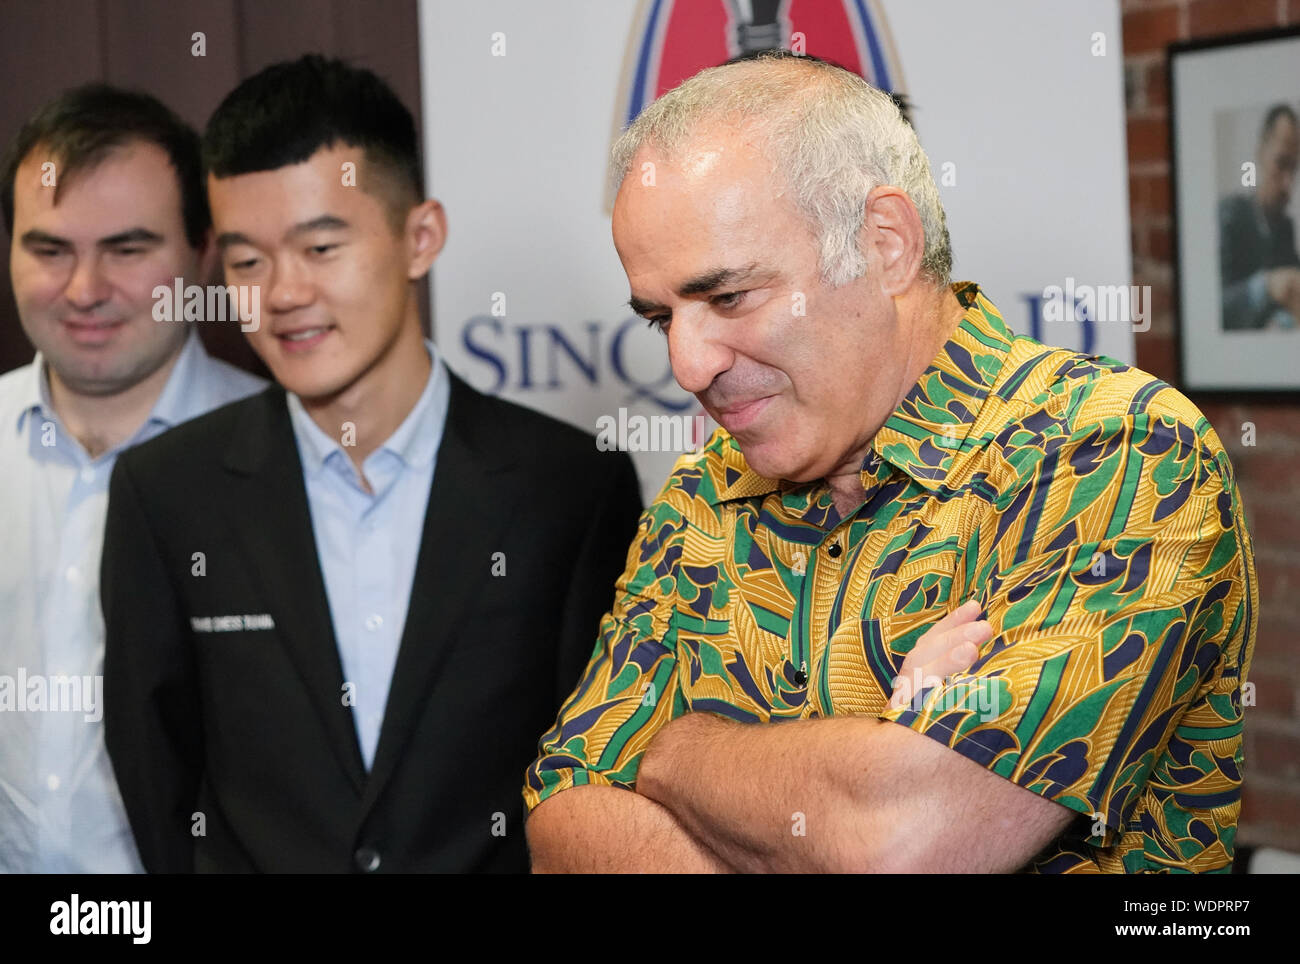 St. Louis, United States. 29th Aug, 2019. Chess Grand Master, Garry Kasparov watches exhibition team play with other Grand Masters at the Saint Louis Chess Club in St. Louis on Thursday, August 29, 2019. Kasparov, the former world chess champion, is considered to be the greatest chess player of all time. Photo by Bill Greenblatt/UPI Credit: UPI/Alamy Live News Stock Photo